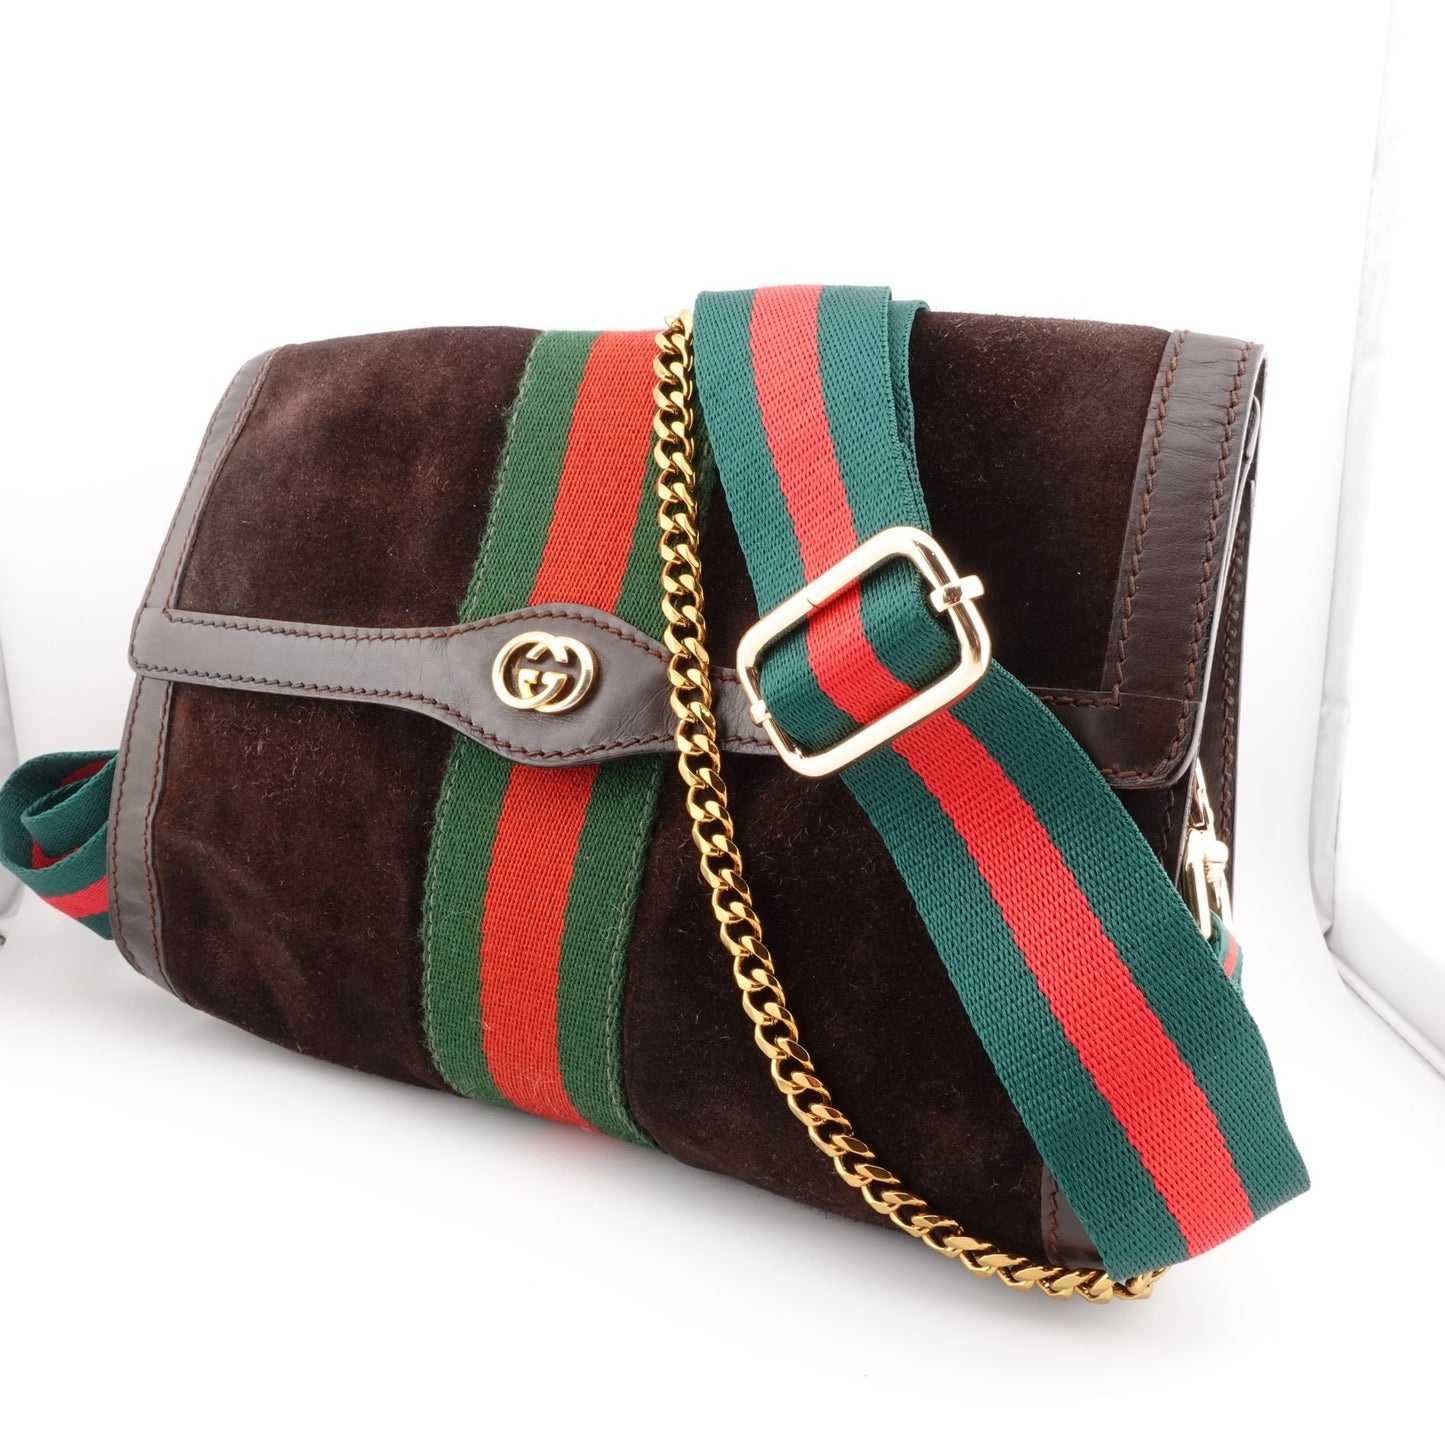 GUCCI Medium Suede Ophidia Clutch with Strap & Chain - Bag Envy